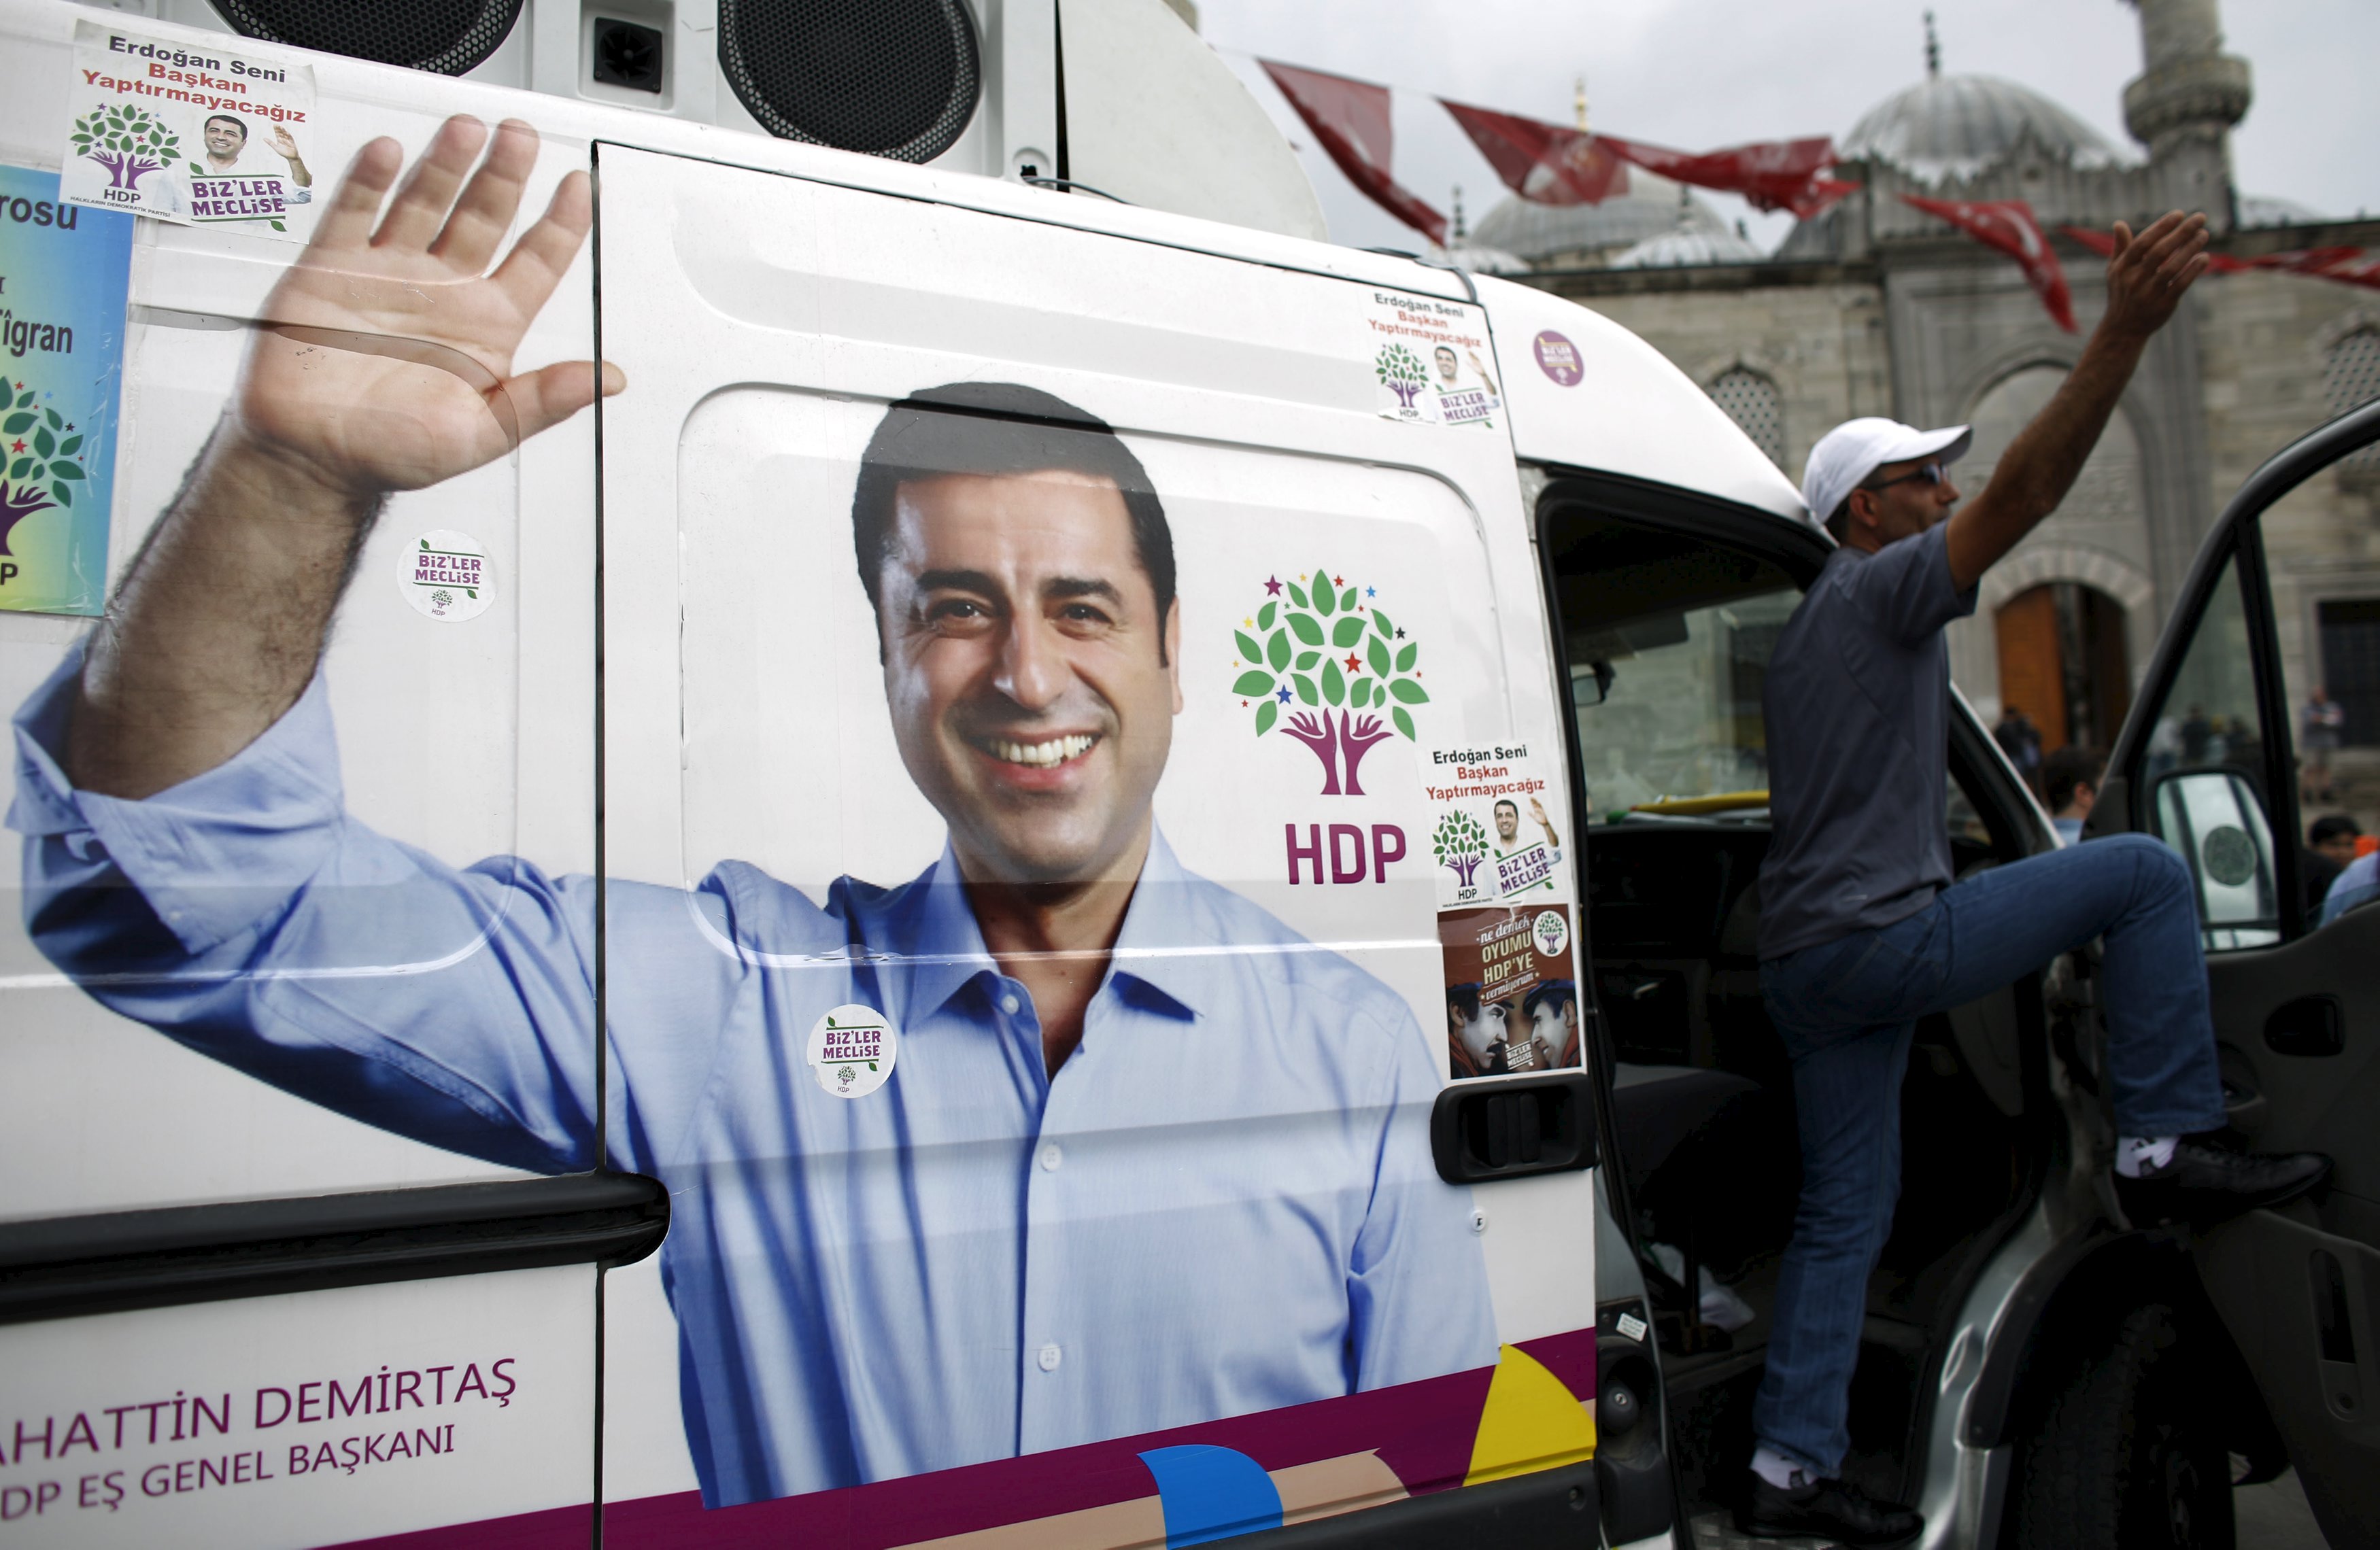 A supporter of pro-Kurdish People's Democratic Party (HDP) stands on an election campaign minibus with a picture of the party's co-chair Selahattin Demirtas on it, in Istanbul, Turkey, May 28, 2015. Turkey's Pro-Kurdish People's Democratic Party (HDP) said on Wednesday June elections would lack legitimacy if a threshold for parliamentary representation deprived it of representation, but it would remain a partner in peace talks with militants. The fate of the HDP, which hopes to cross the 10 percent national vote threshold to enter parliament on June 7, will be critical not just for the Kurdish minority but also for the political future of President Tayyip Erdogan. REUTERS/Murad Sezer